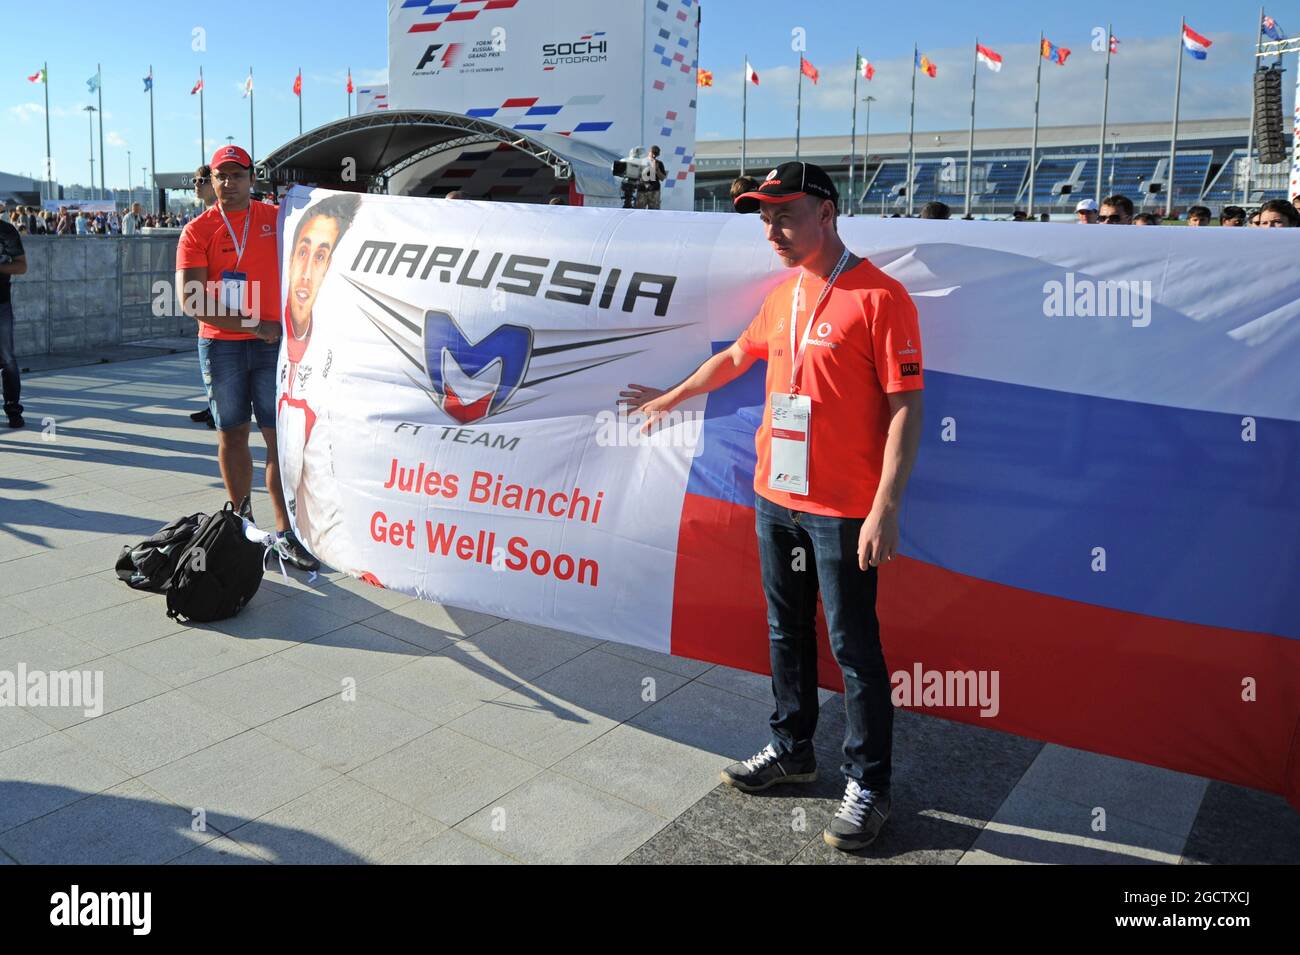 A Get Well Soon banner for Jules Bianchi (FRA) Marussia F1 Team. Russian Grand Prix, Thursday 9th October 2014. Sochi Autodrom, Sochi, Russia. Stock Photo